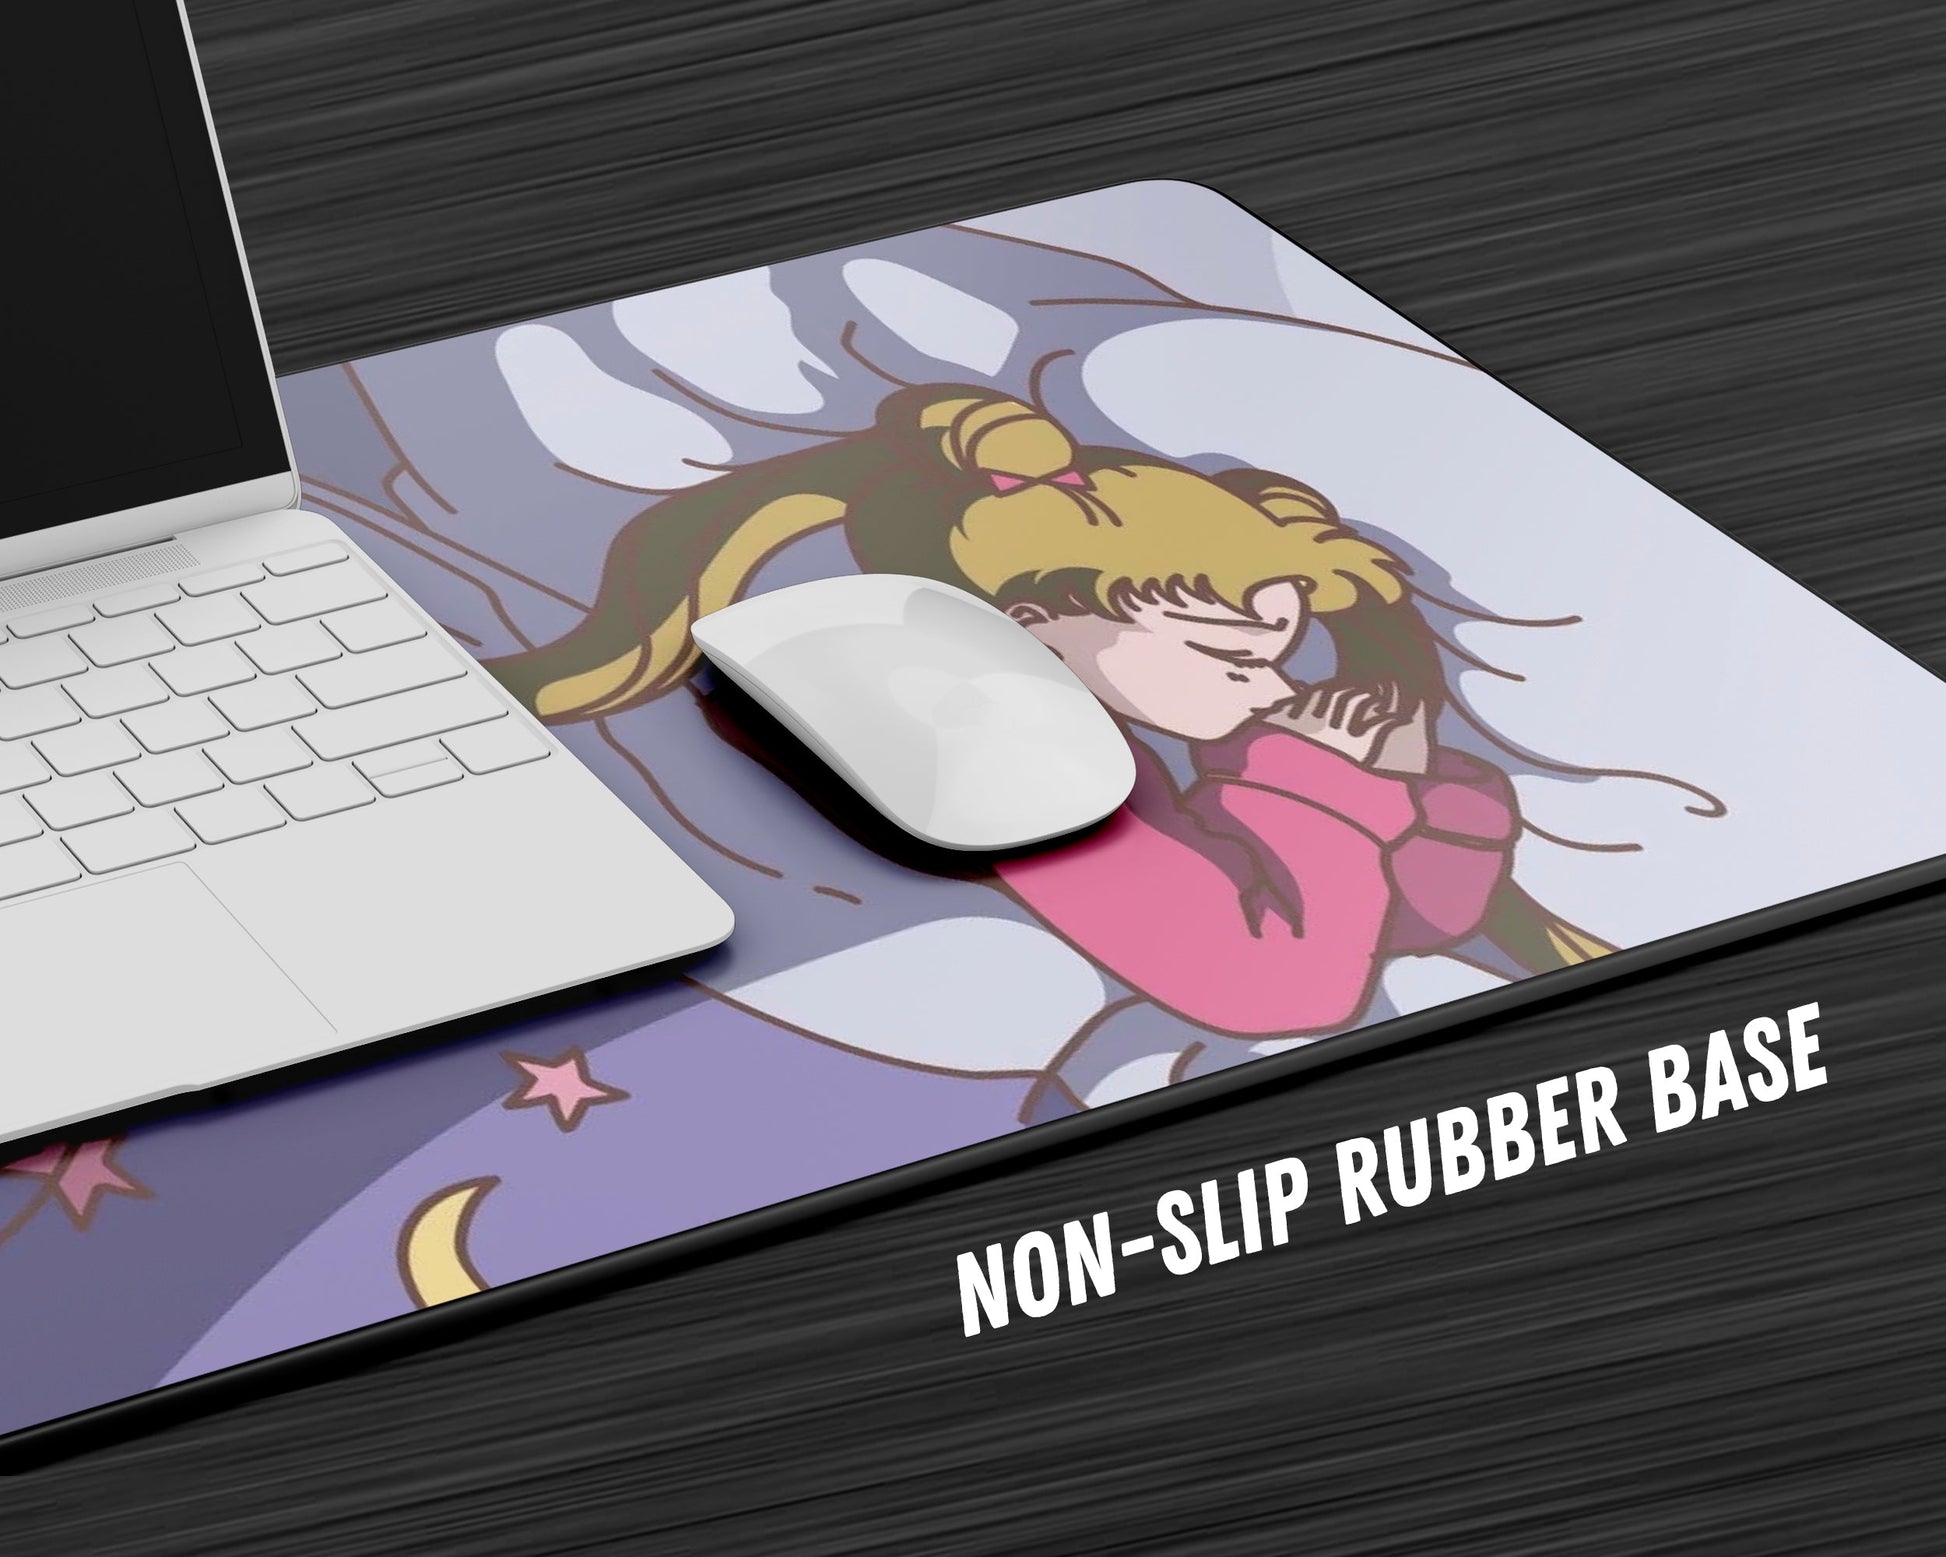 Anime Town Creations Mouse Pad Sleepy Sailor Moon Gaming Mouse Pad Accessories - Anime Bleach Gaming Mouse Pad